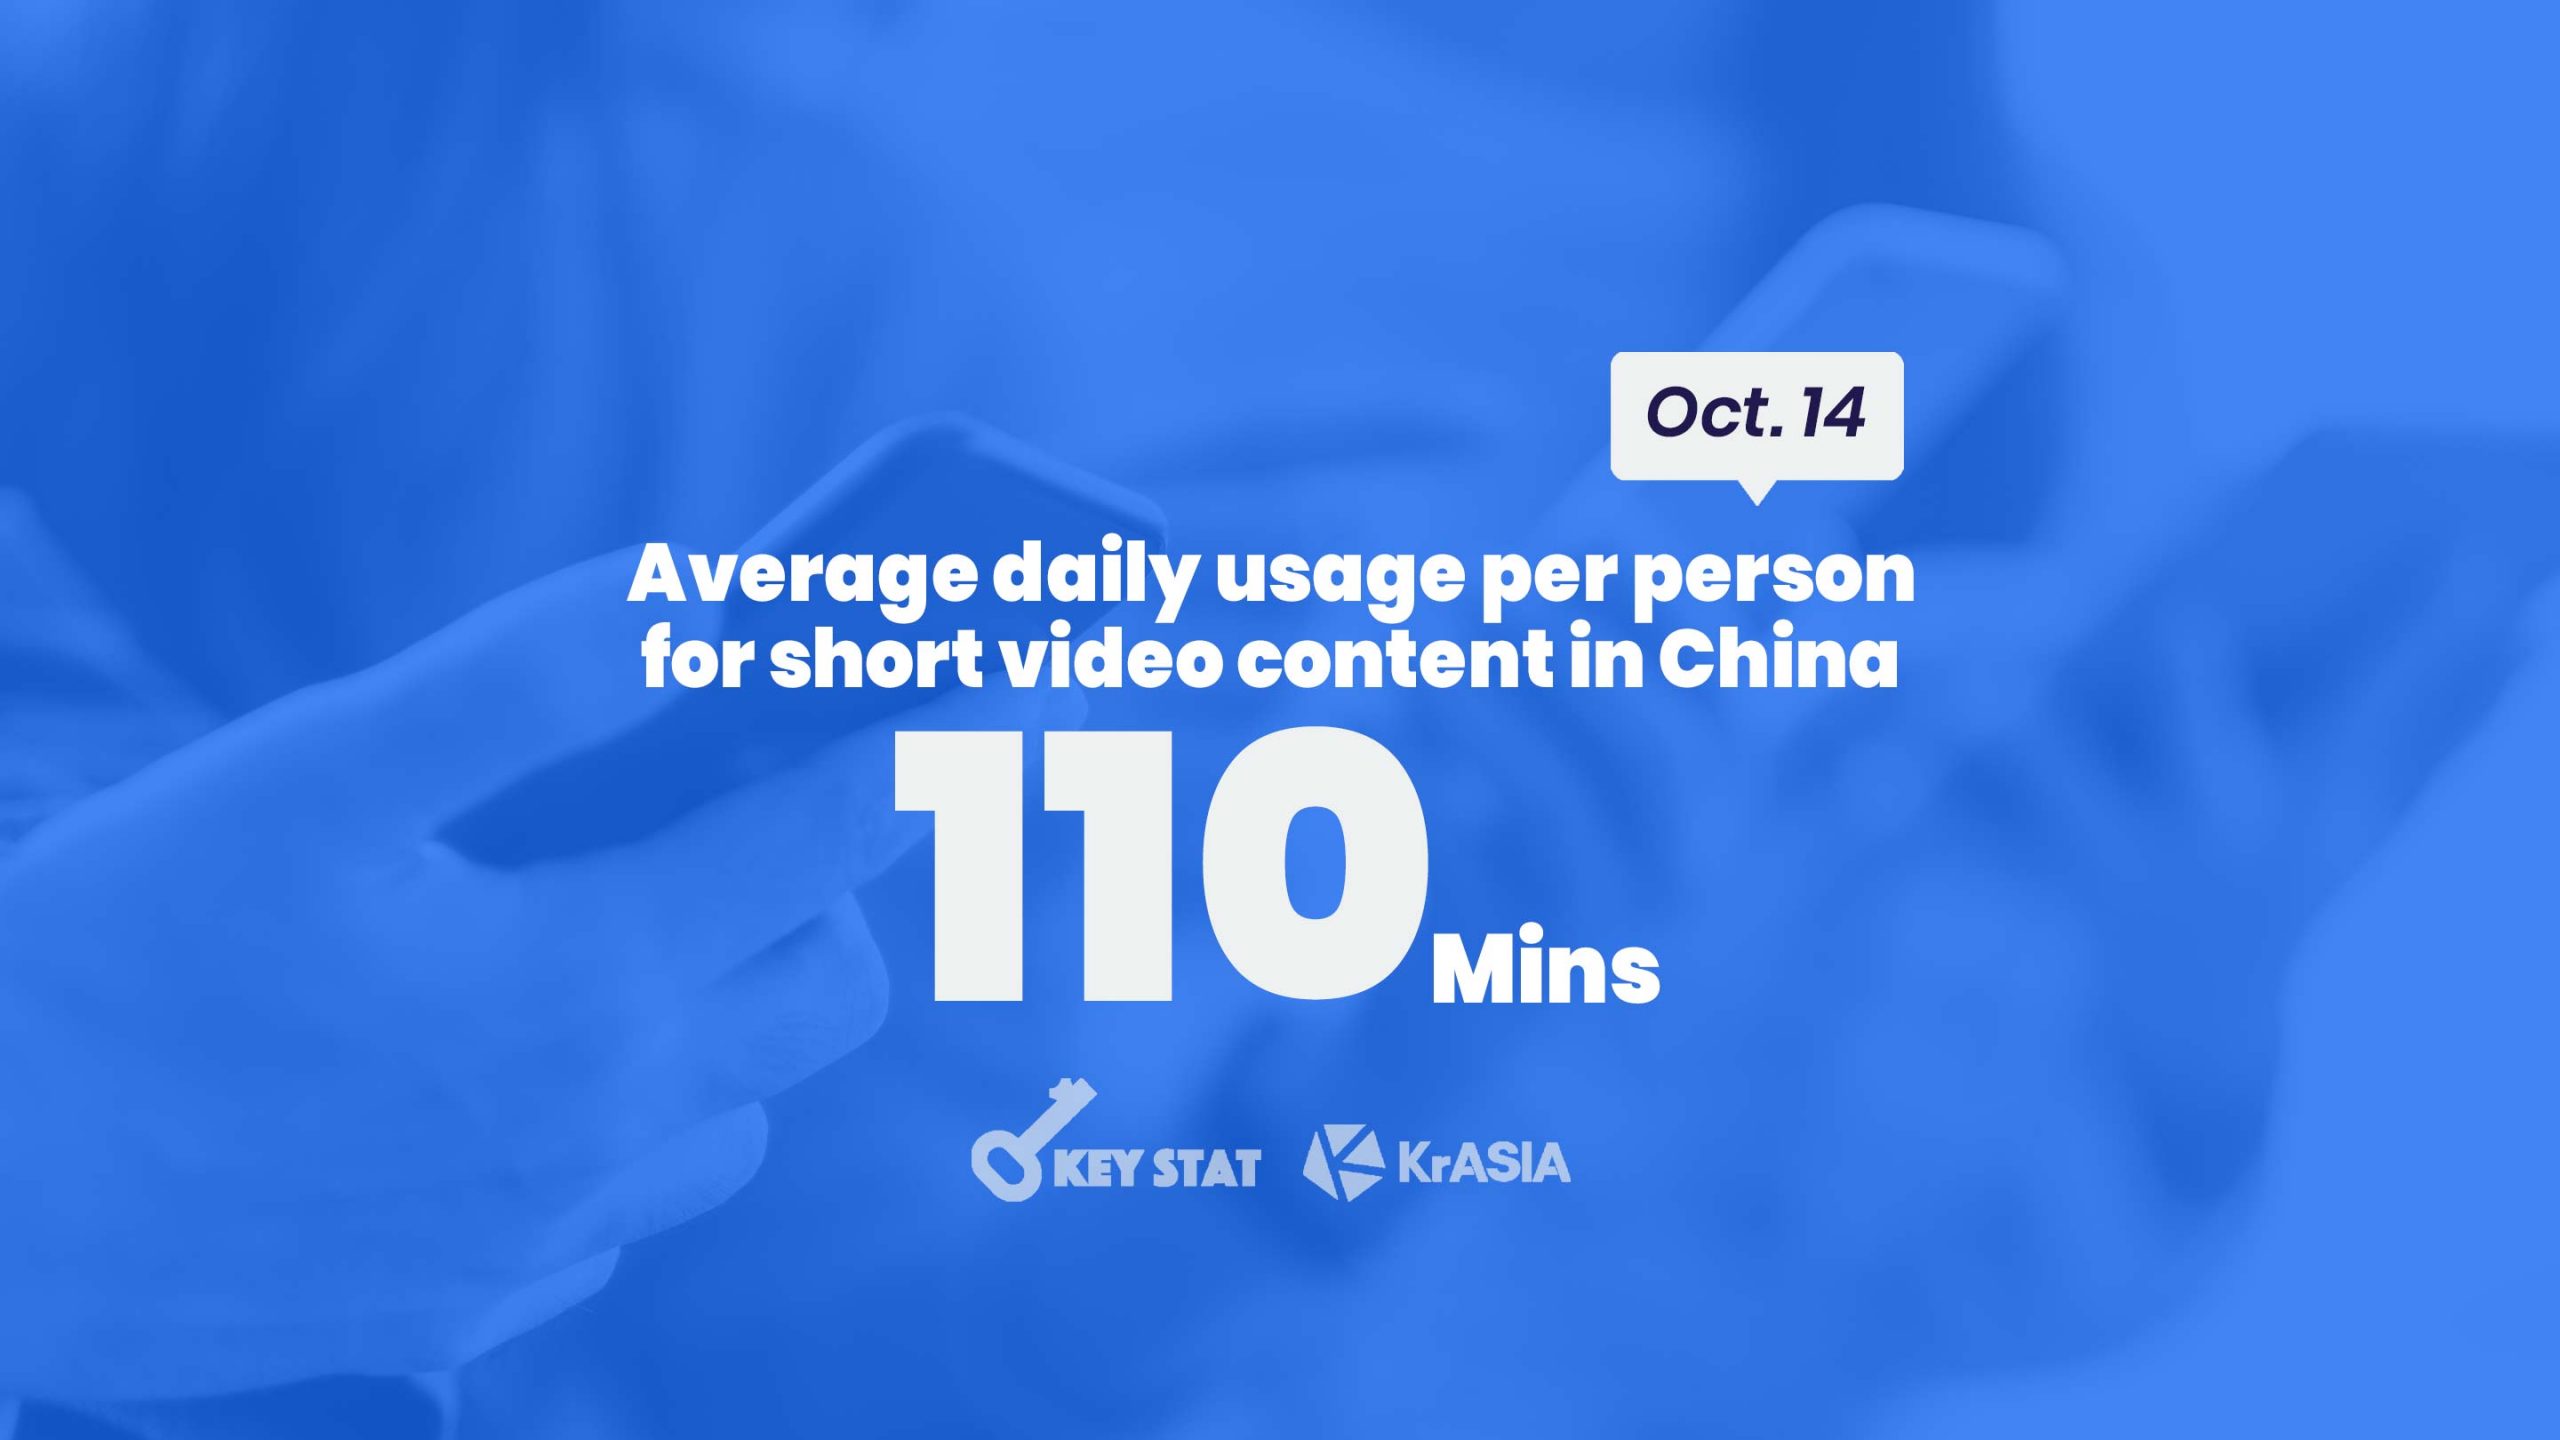 KEY STAT | Chinese people watch short videos for 110 minutes per day